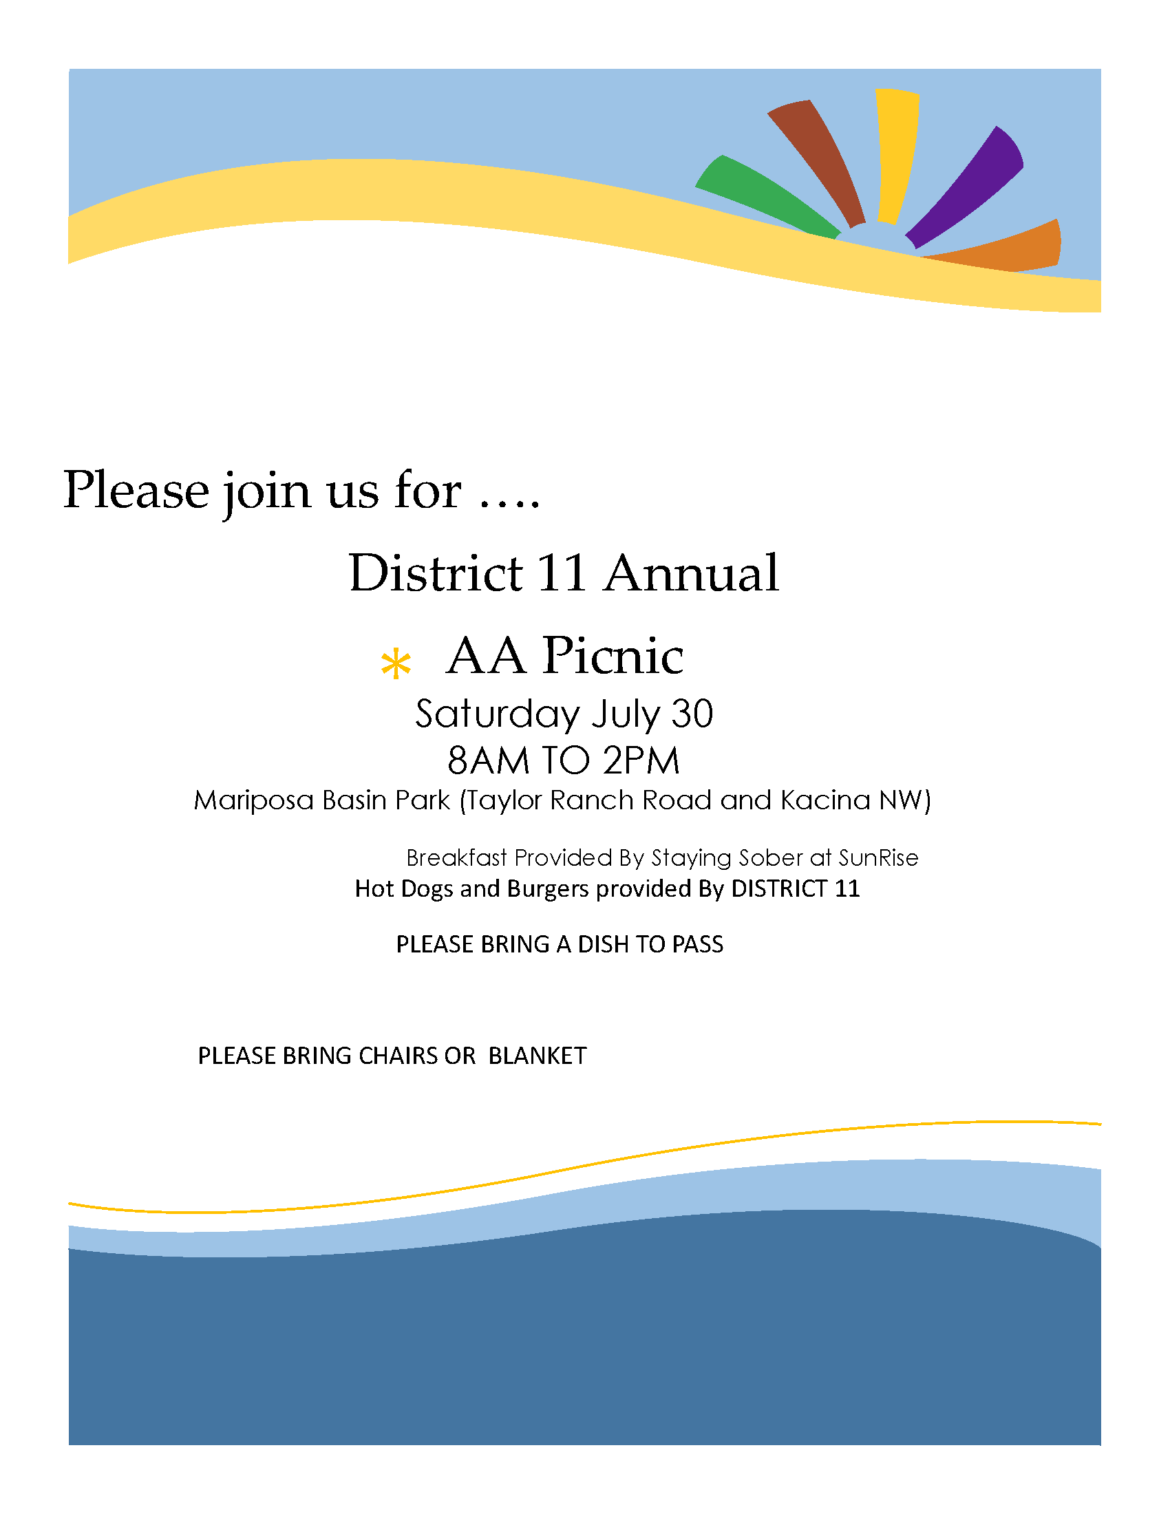 District 11 Annual Picnic Flyer